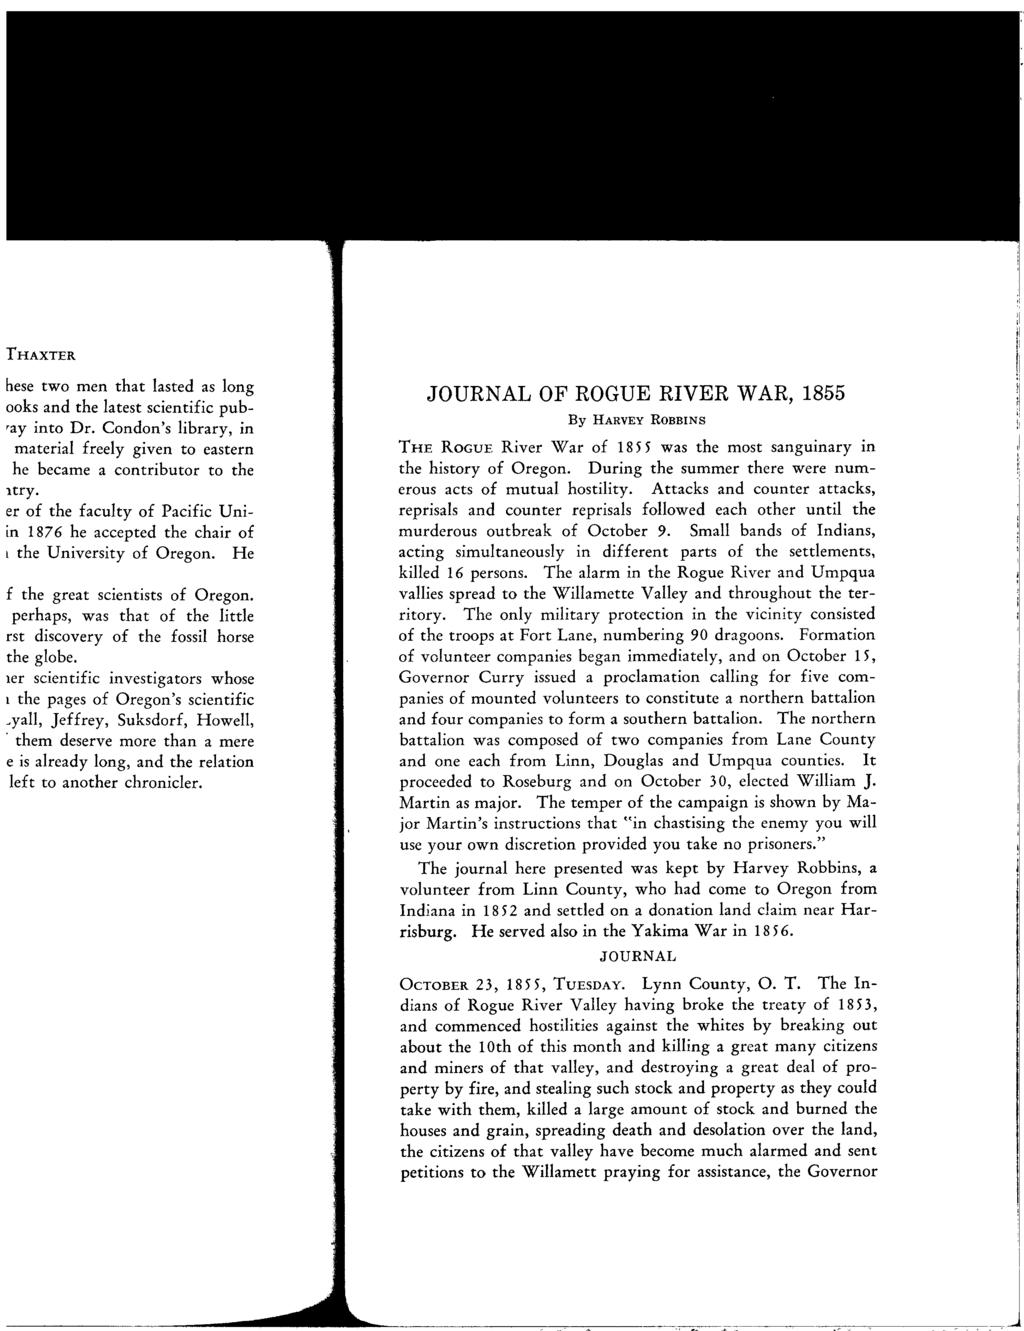 JOURNAL OF ROGUE RIVER WAR, 1855 By HARVEY RoBBINS THE ROGUE River War of 1855 was the most sanguinary in the history of Oregon. During the summer there were numerous acts of mutual hostility.